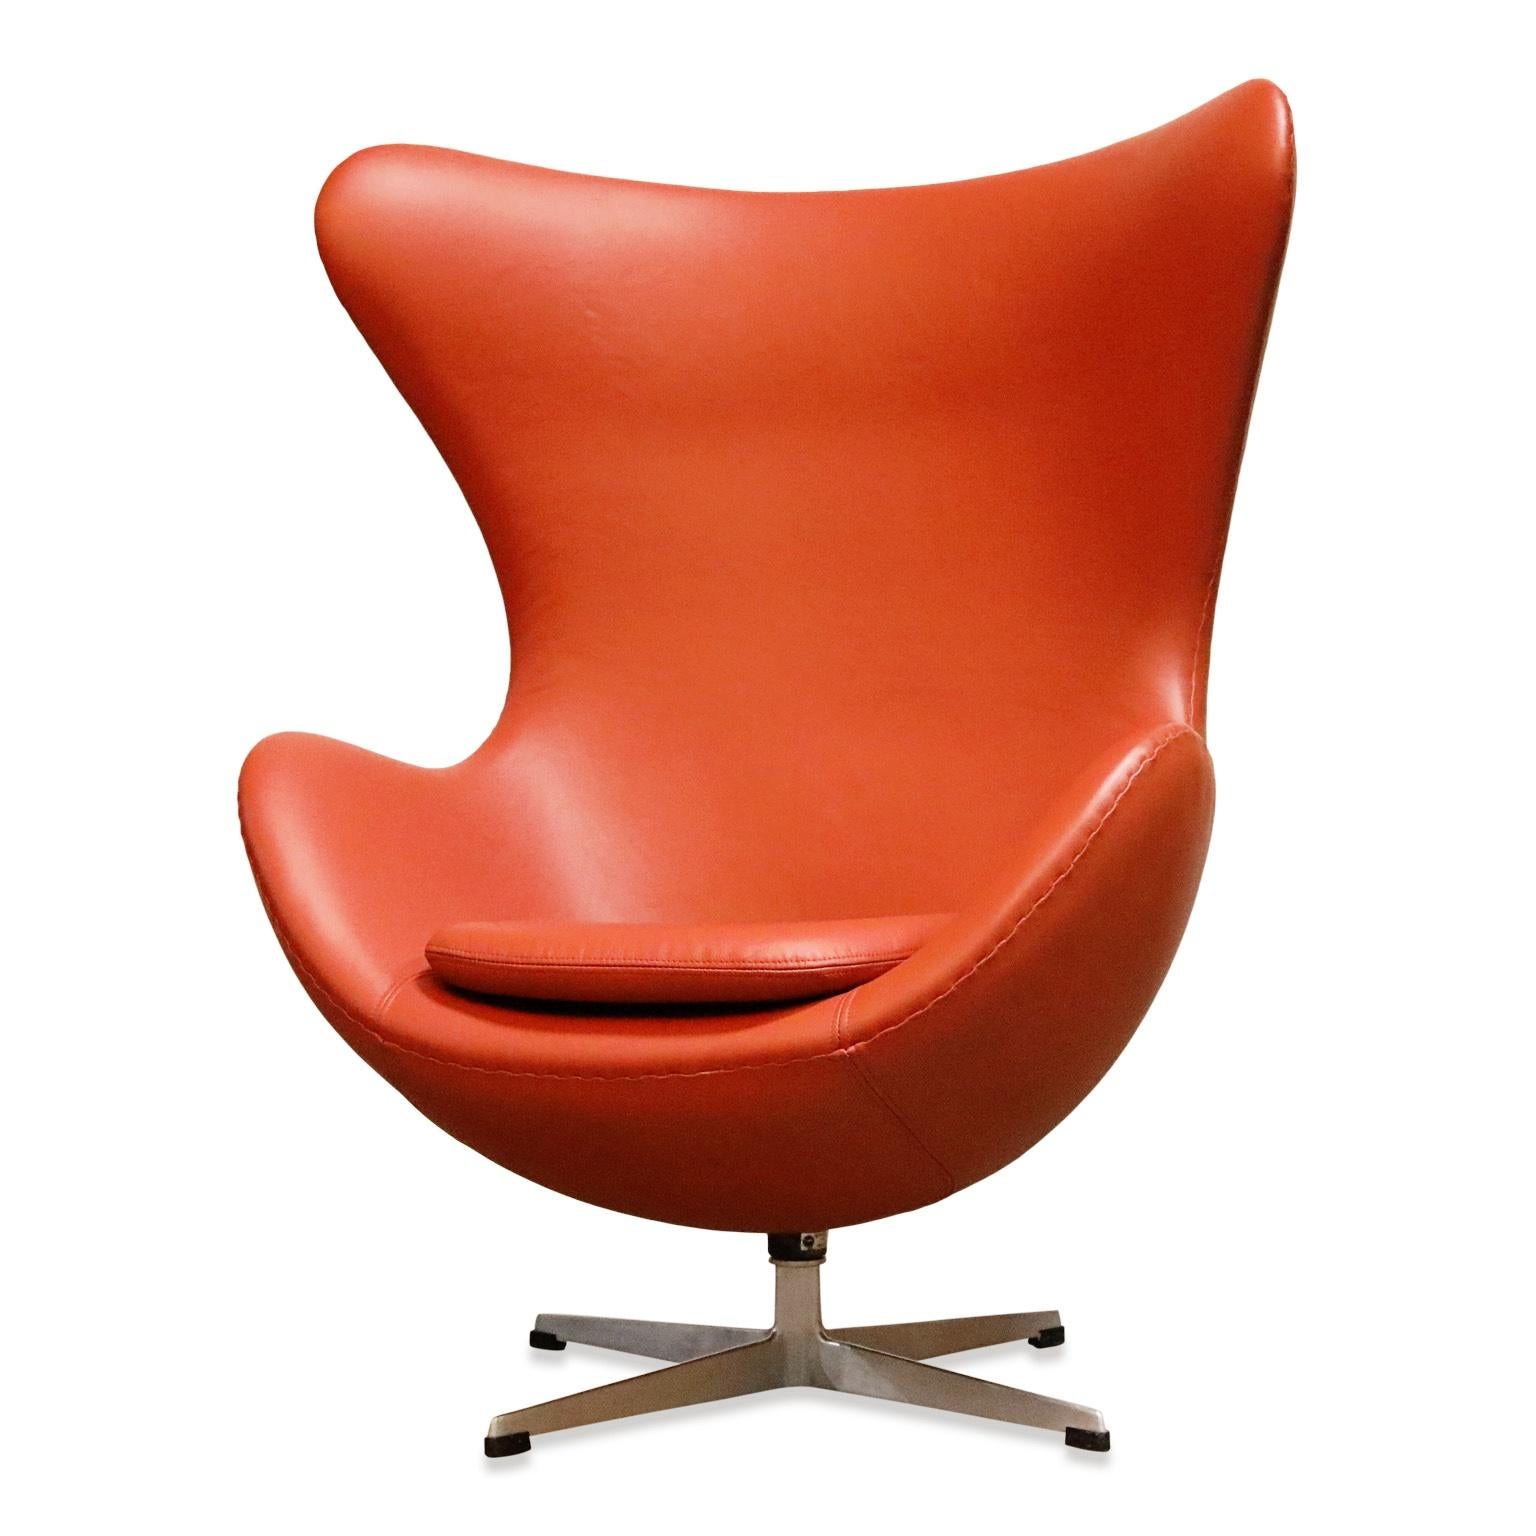 A wonderful signed and dated (Fritz Hansen, November 1963) early production original and authentic example of Arne Jacobsen for Fritz Hansen Egg chair. 

This classic and timeless chair has been recently reupholstered in a burnt orange colored